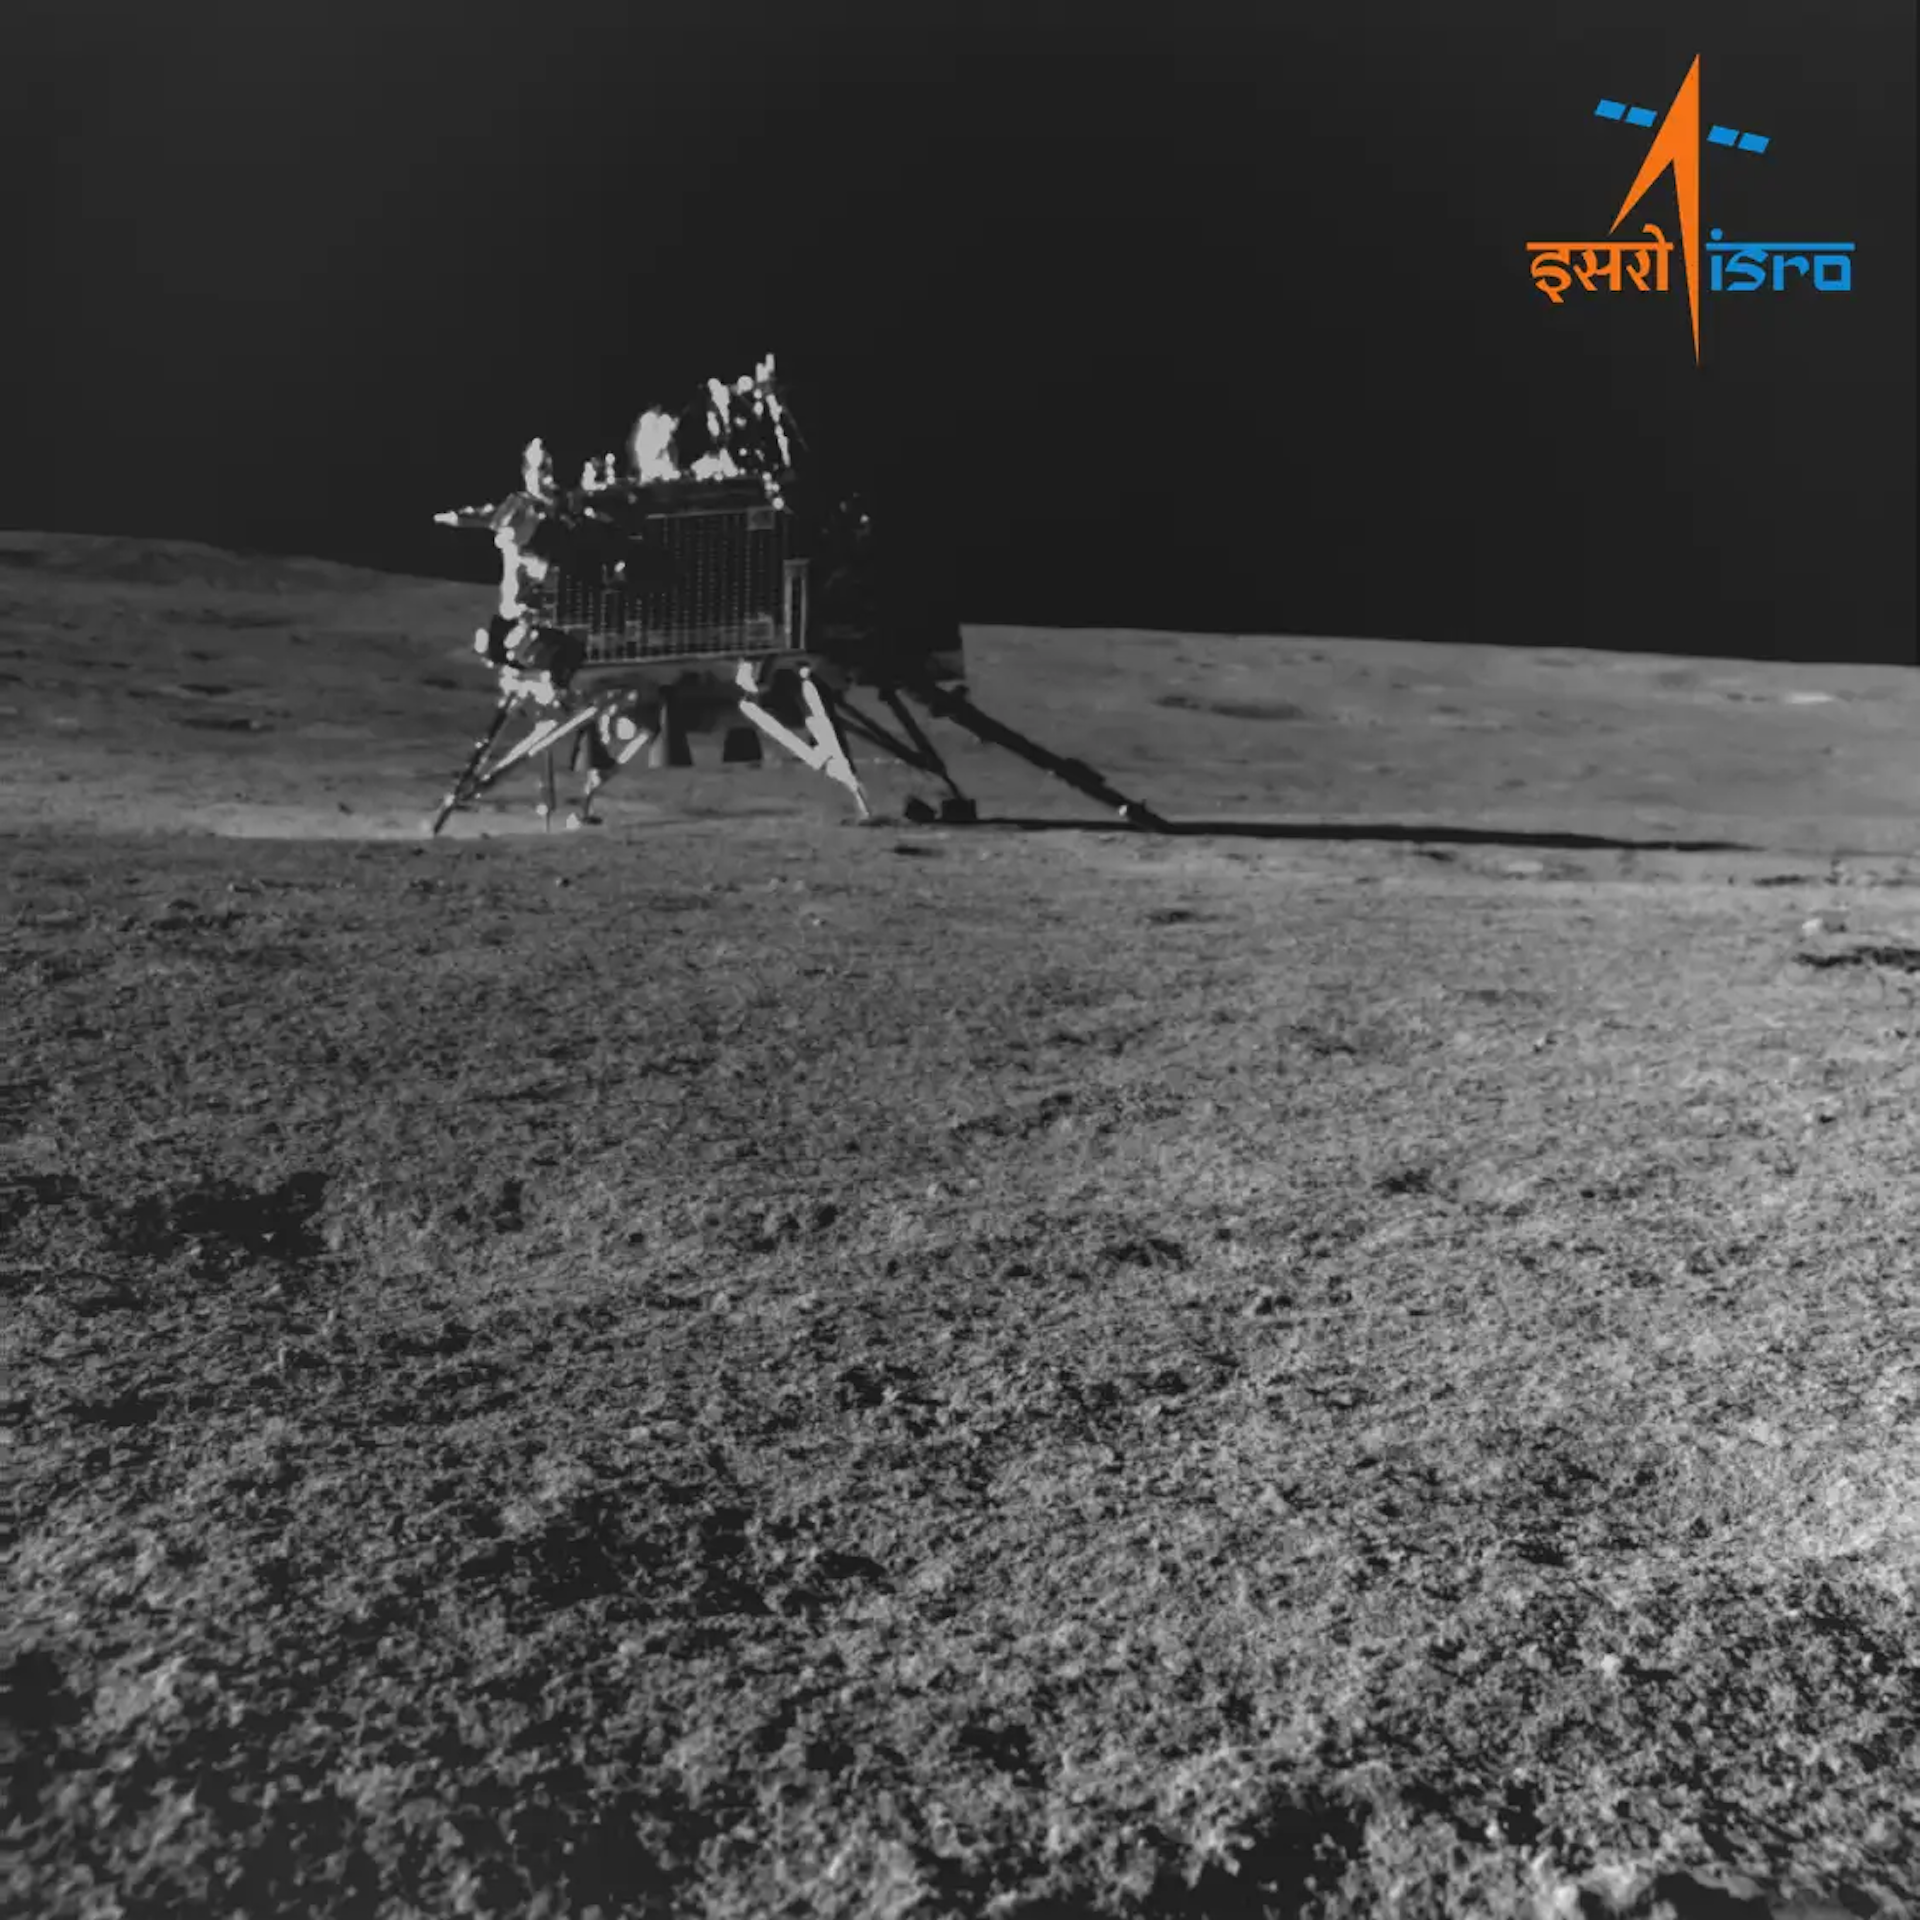 Chandrayaan-3 sits on the lunar surface, its robotic legs extended.